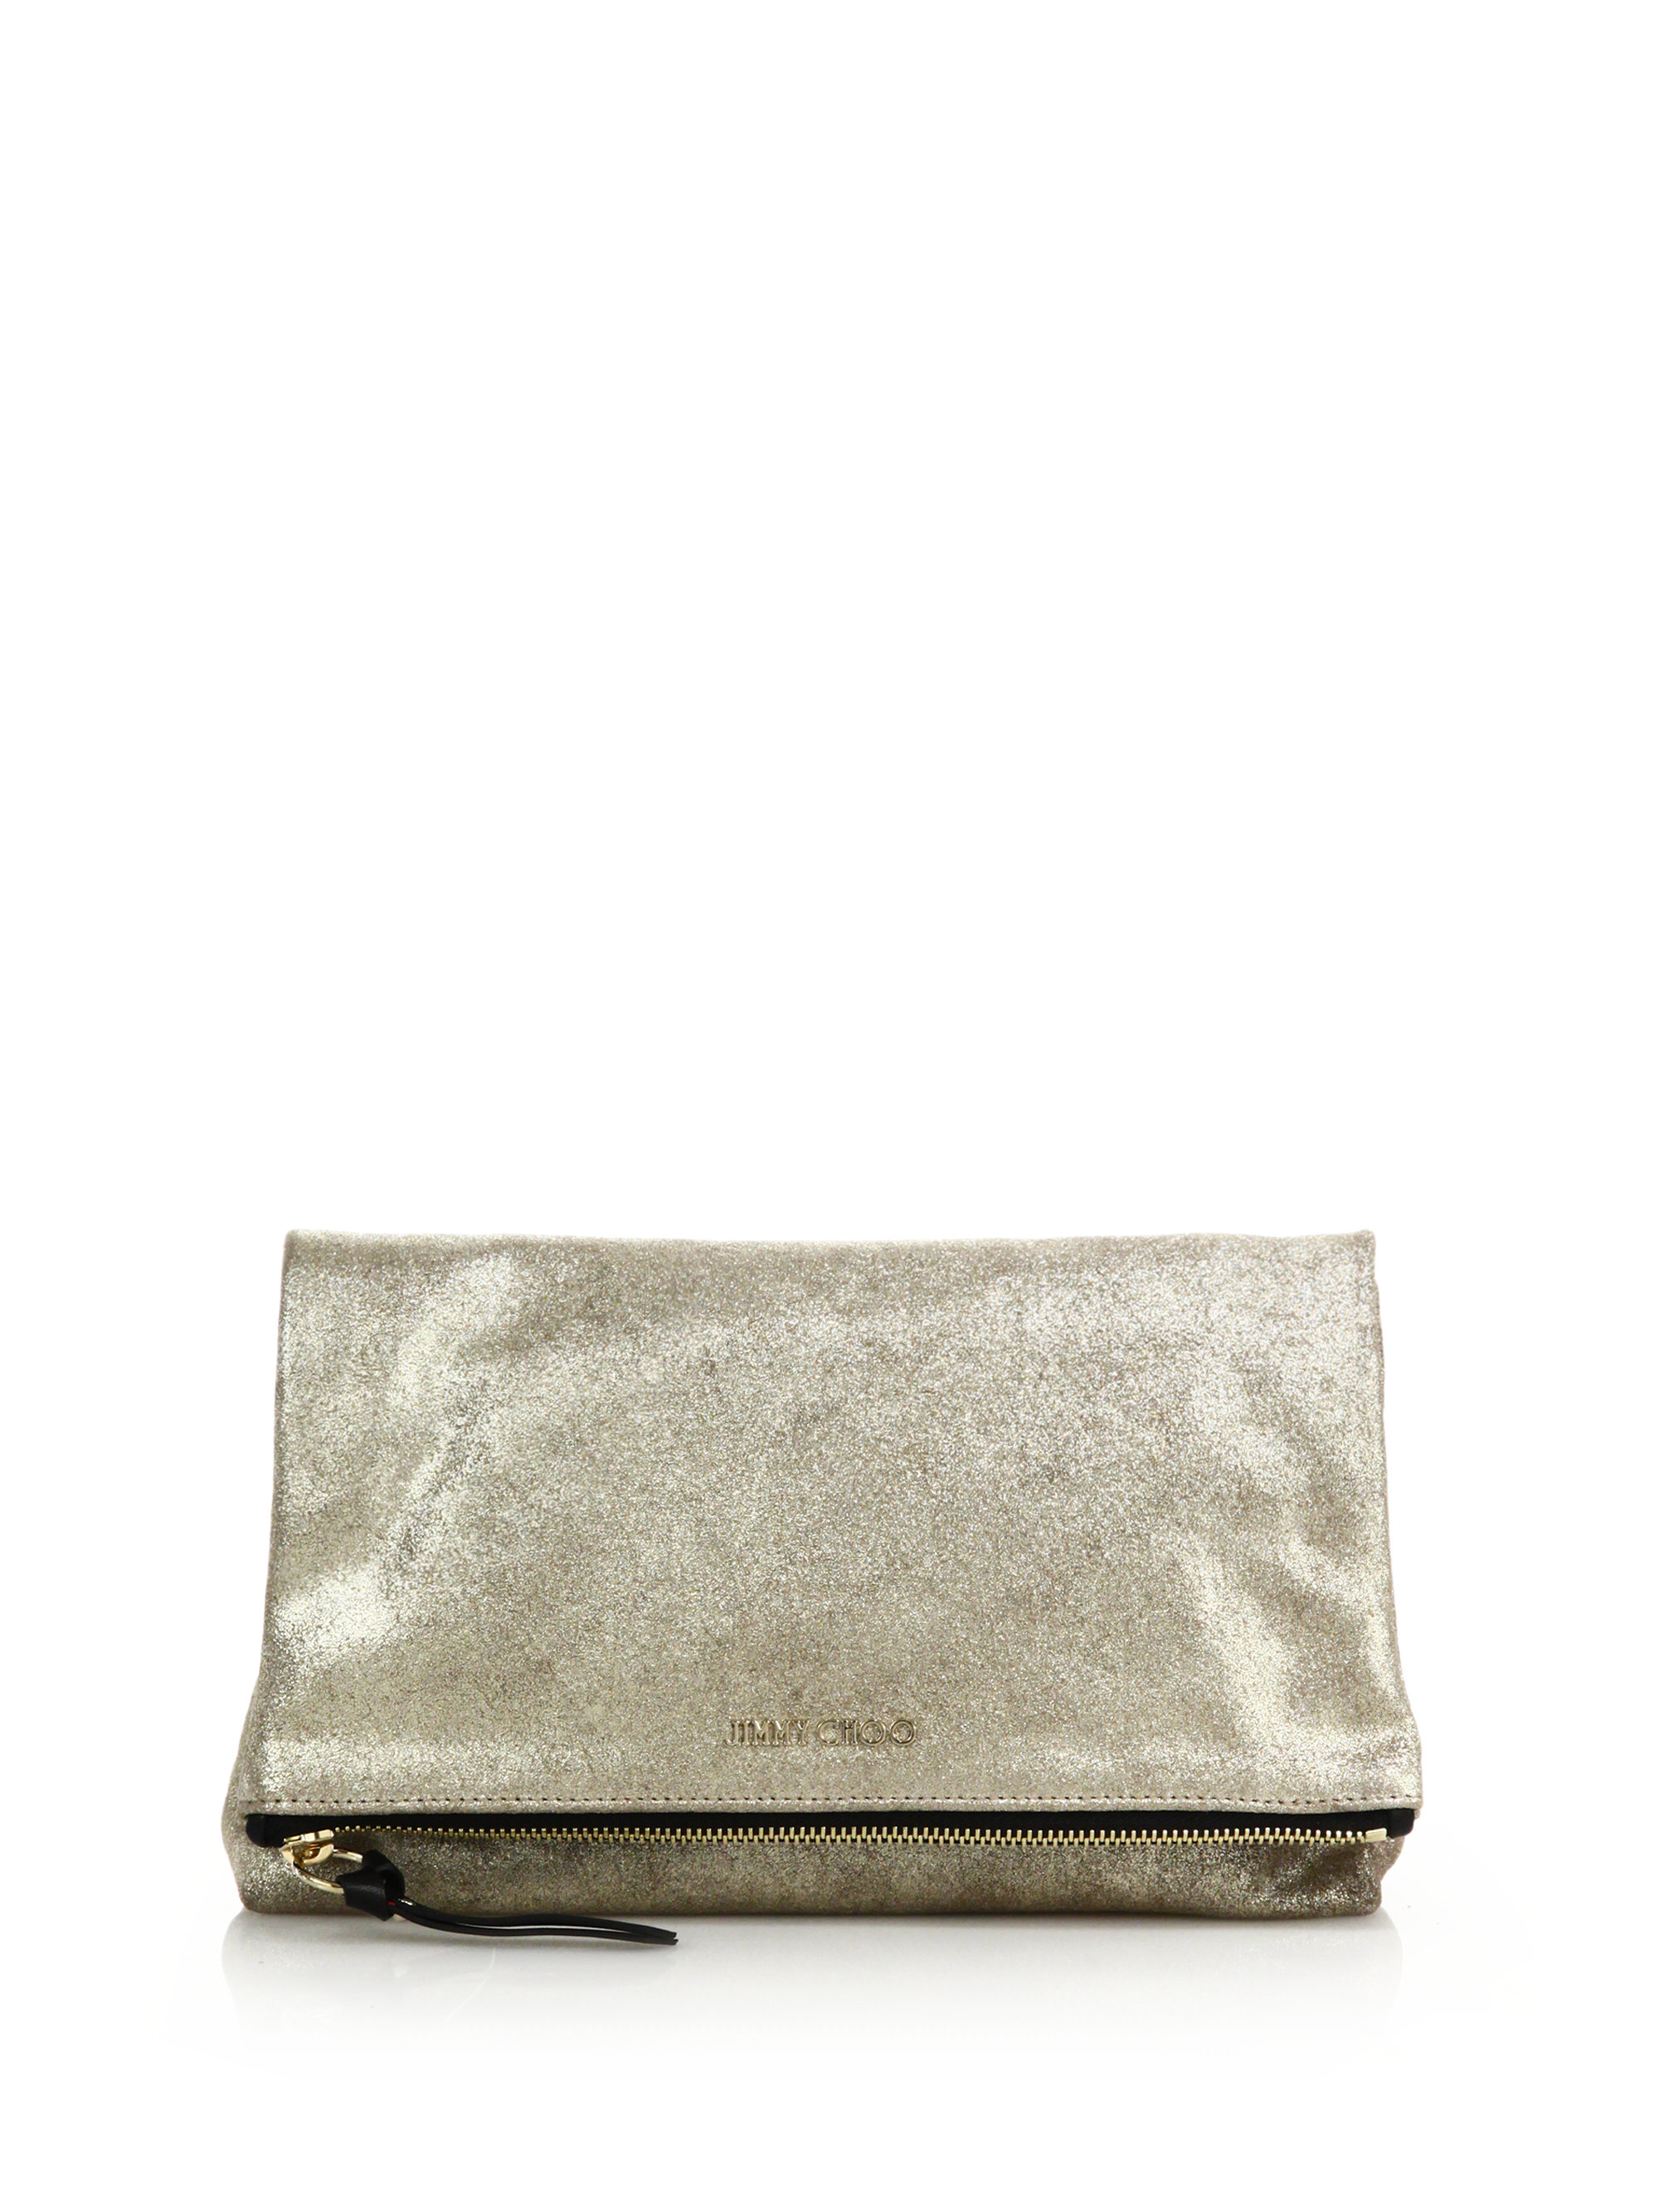 Jimmy choo Shimmer Suede Fold-over Clutch in Gray | Lyst